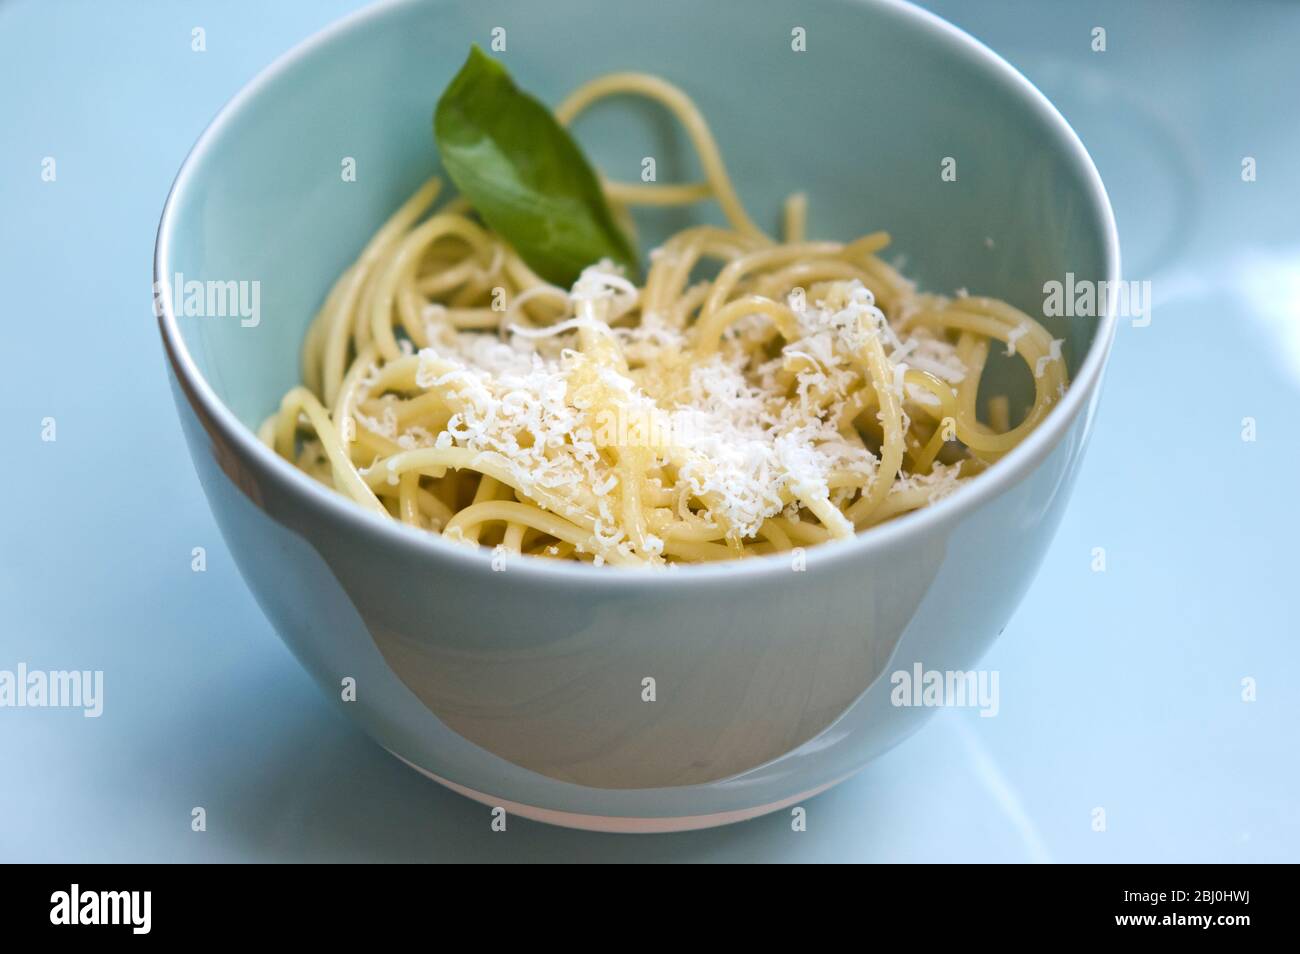 Bowl of plain spaghetti with olive oil and freshly grated parmesan in celadon bowl - Stock Photo